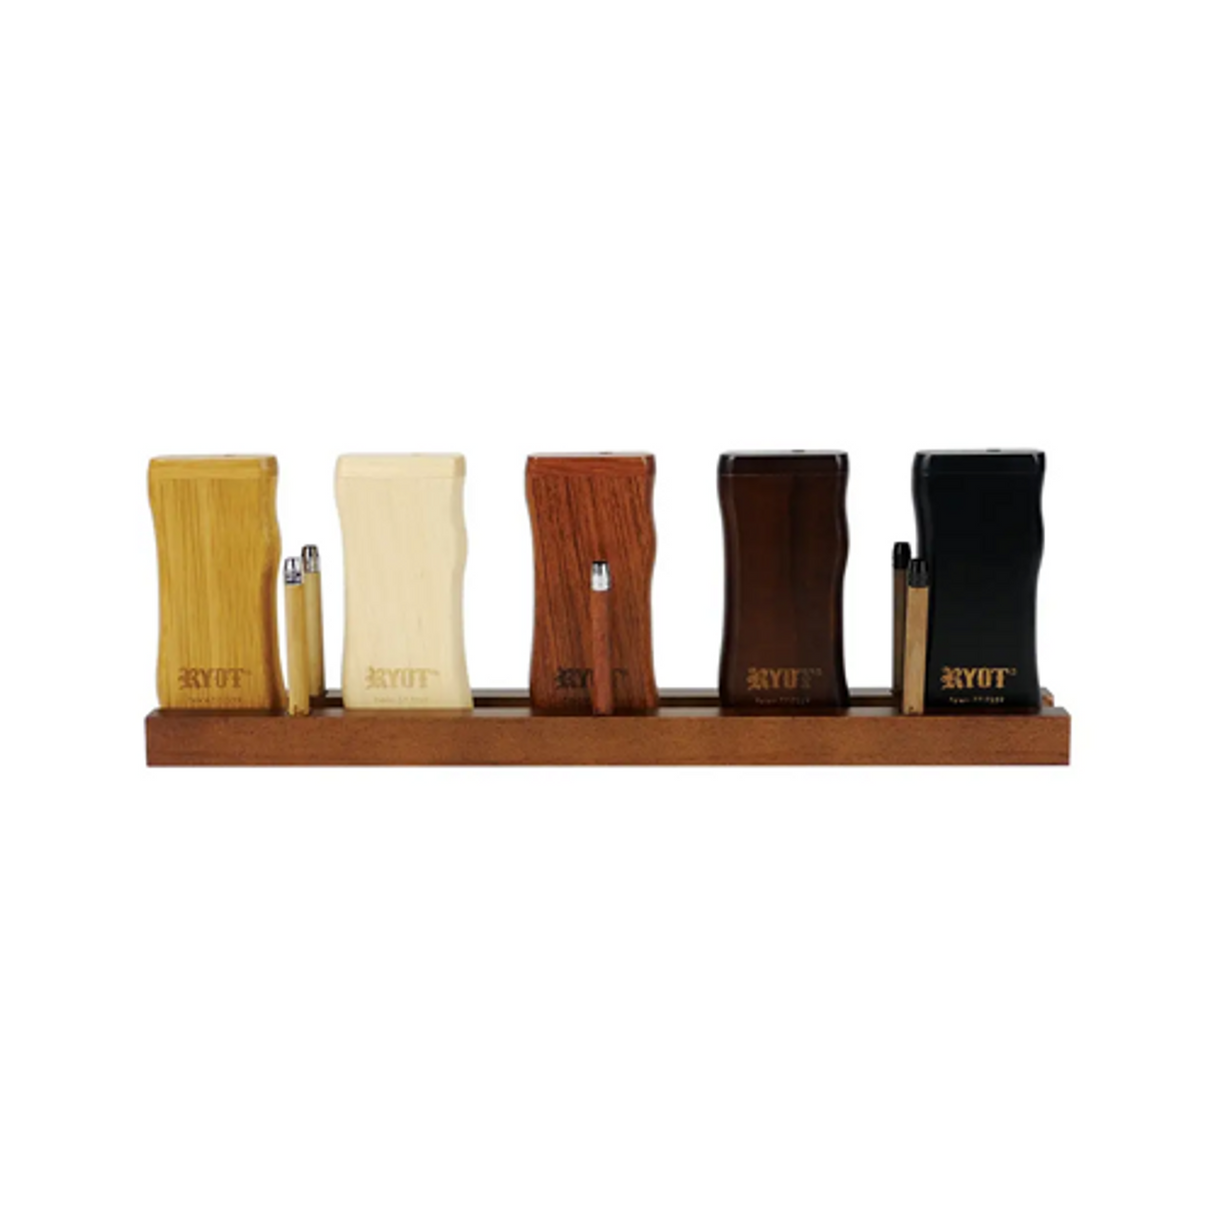 RYOT MPB Taster Box Display Stand in wood with various color options, front view on white background